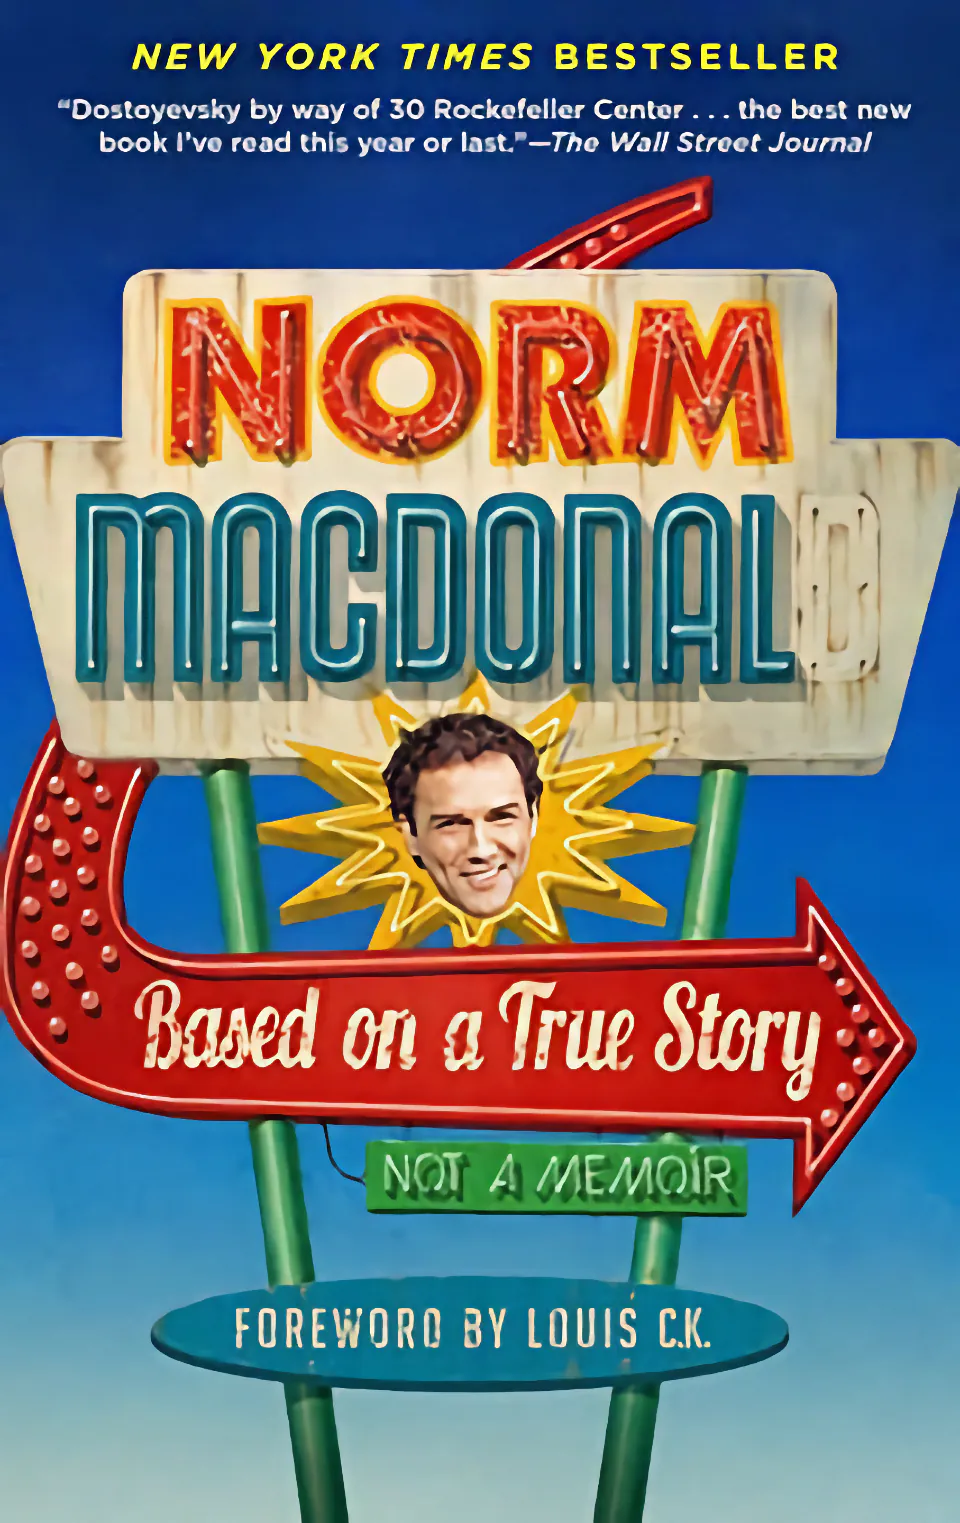 Based on a True Story: Not a Memoir by Norm Macdonald finished on 2022 Nov 12